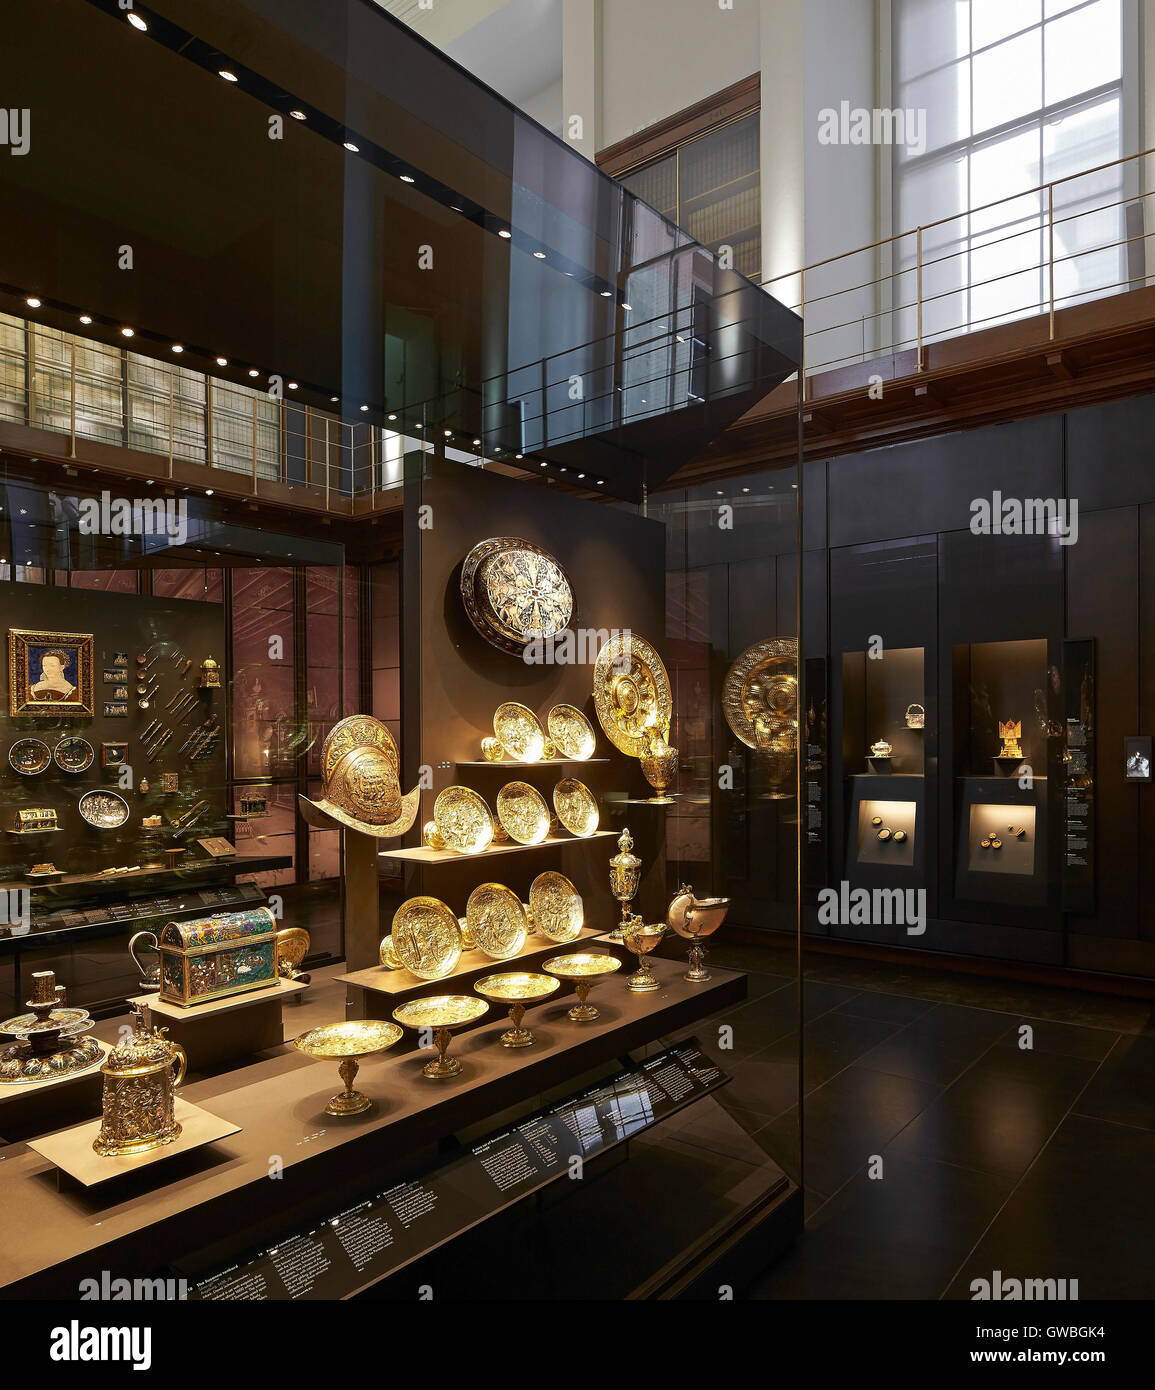 Plates, tazzas and casket in freestanding showcase. Waddesdon Bequest Gallery at the British Museum, London, United Kingdom. Architect: Stanton Williams, 2015. Stock Photo